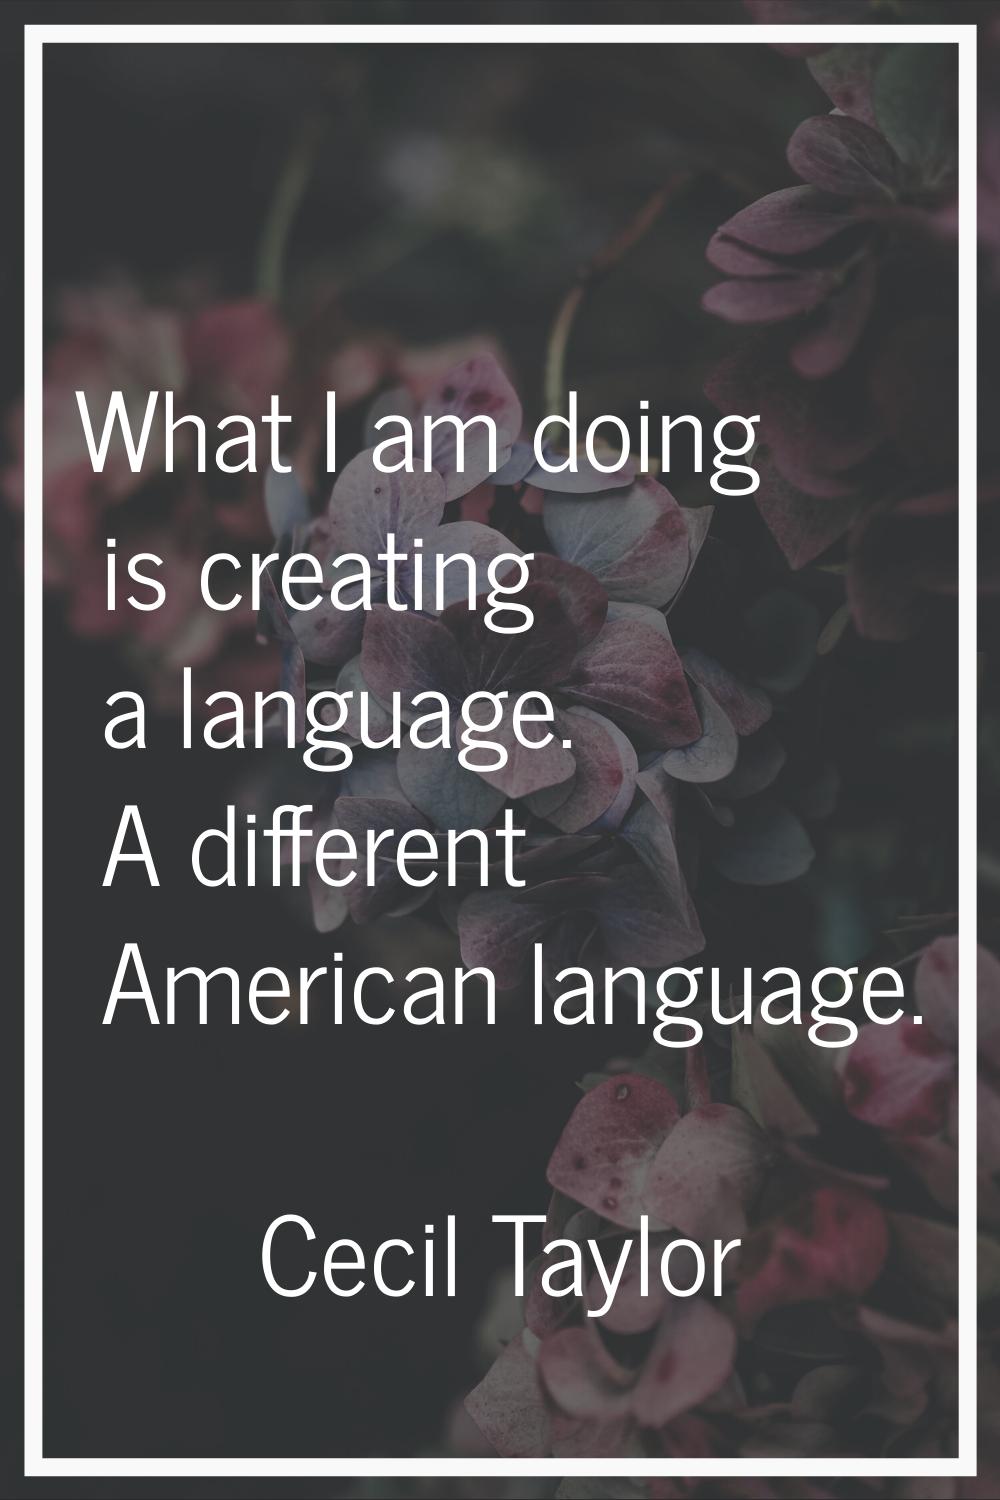 What I am doing is creating a language. A different American language.